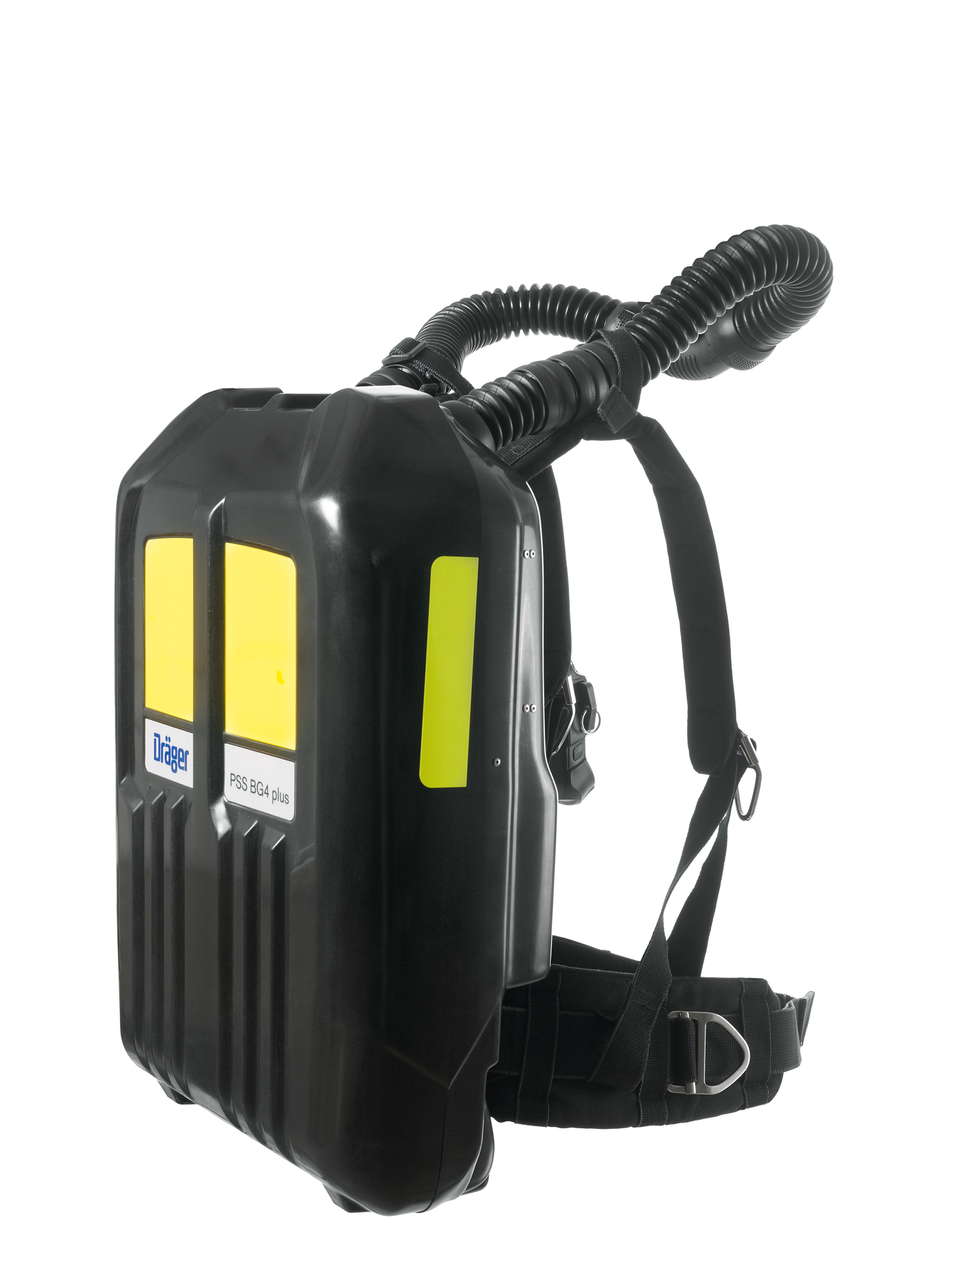 Draeger BG 4 Plus Closed Circuit Breathing Apparatus (Rebreather) WITH FPS  7000 Hydration Mask, Cylinder and Case - TG Technical Services